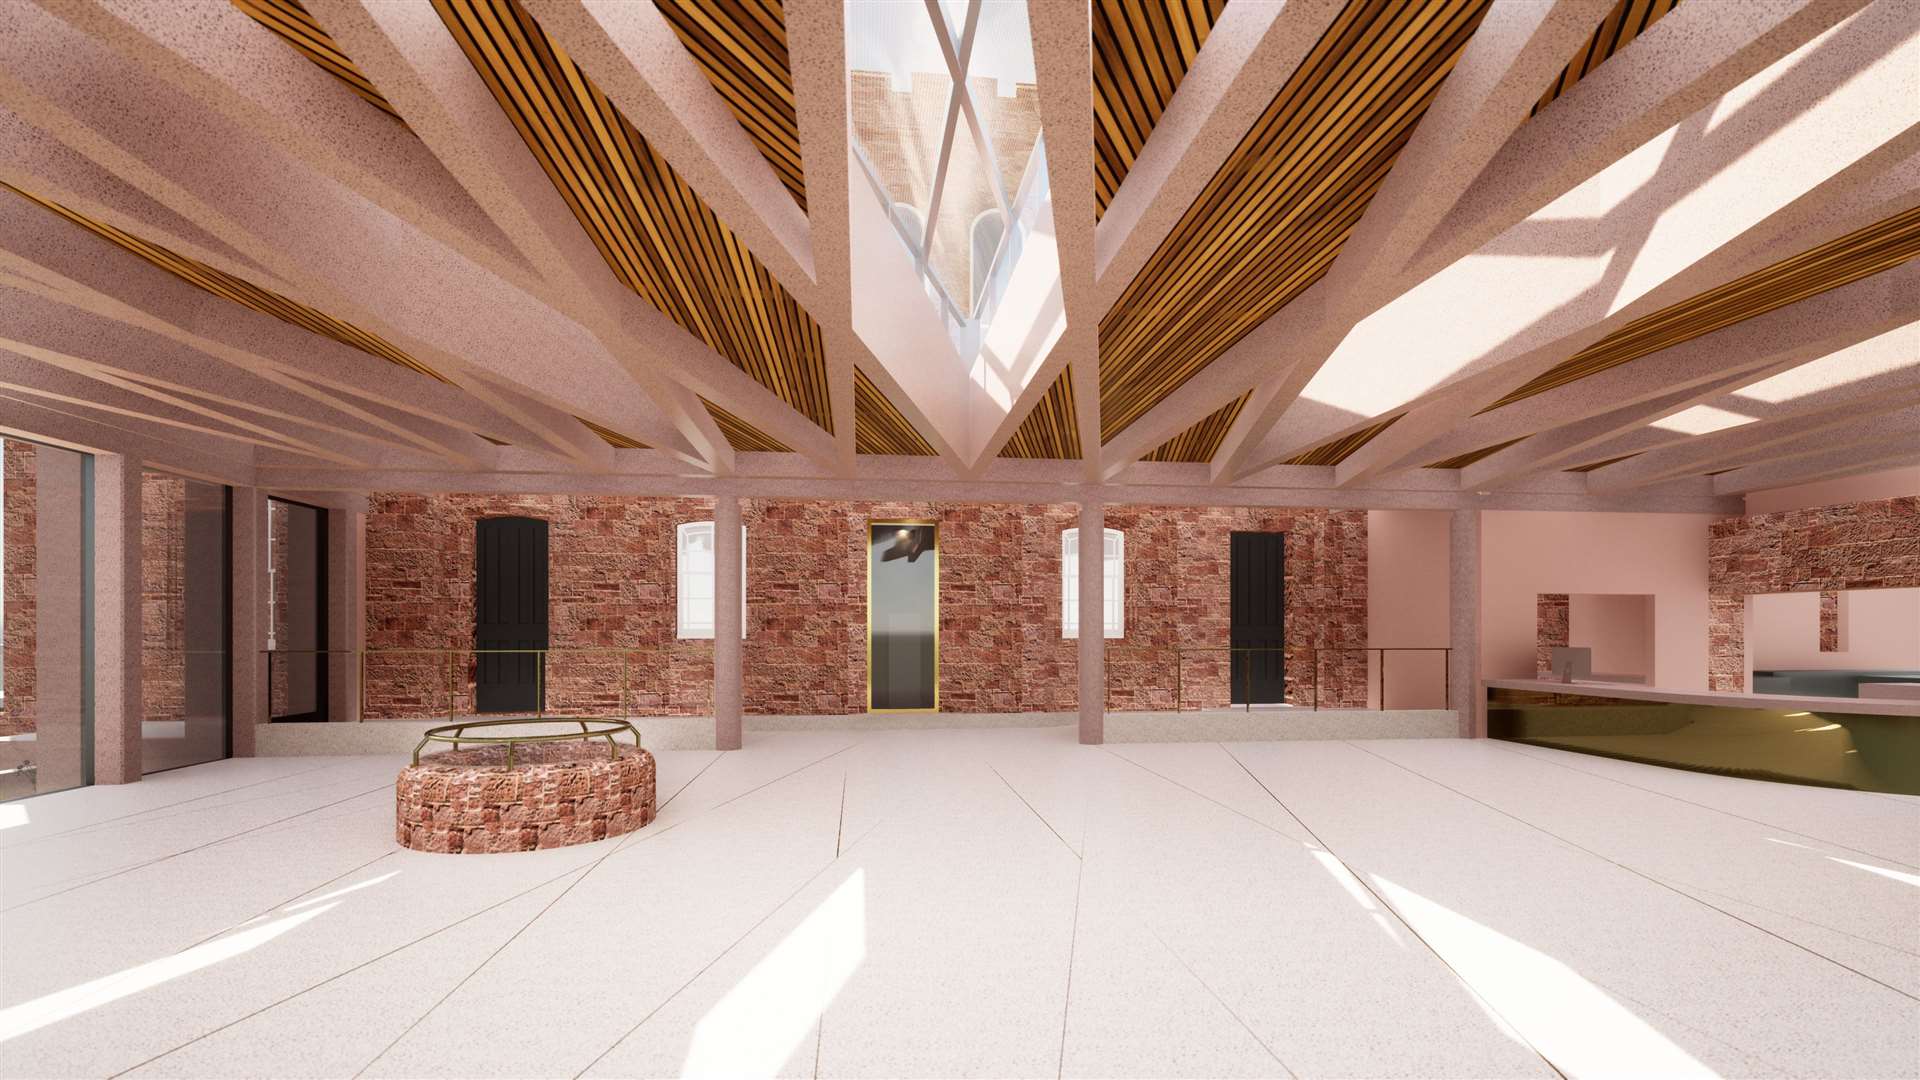 Inverness Castle interior. Artist impression by LDN Architects.